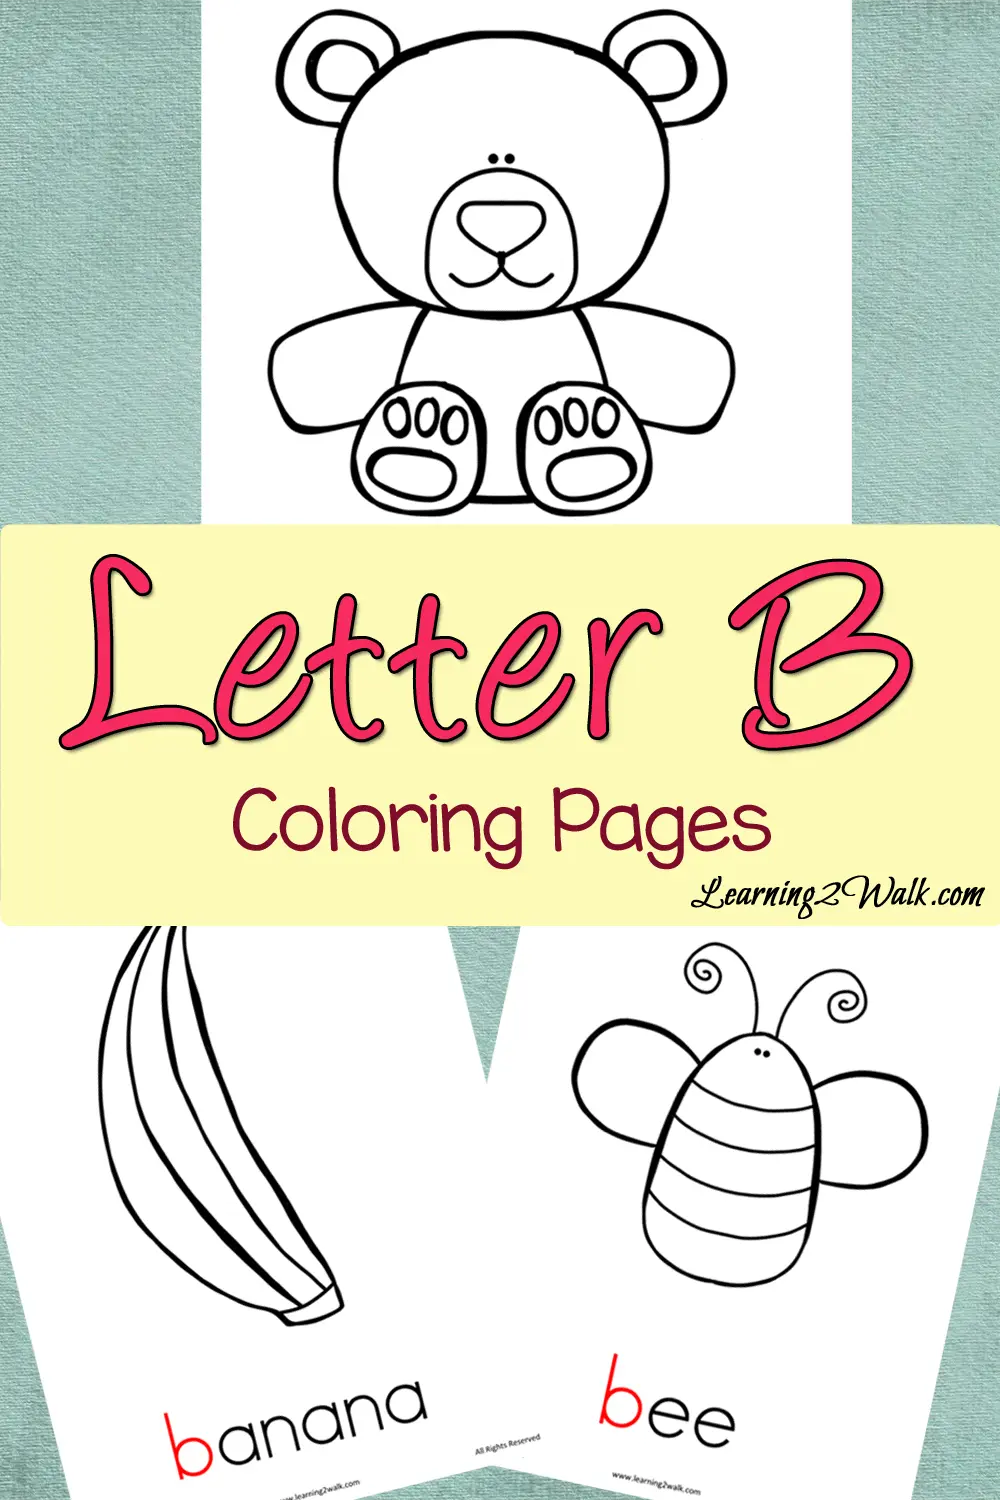 Free printable letter b coloring pages